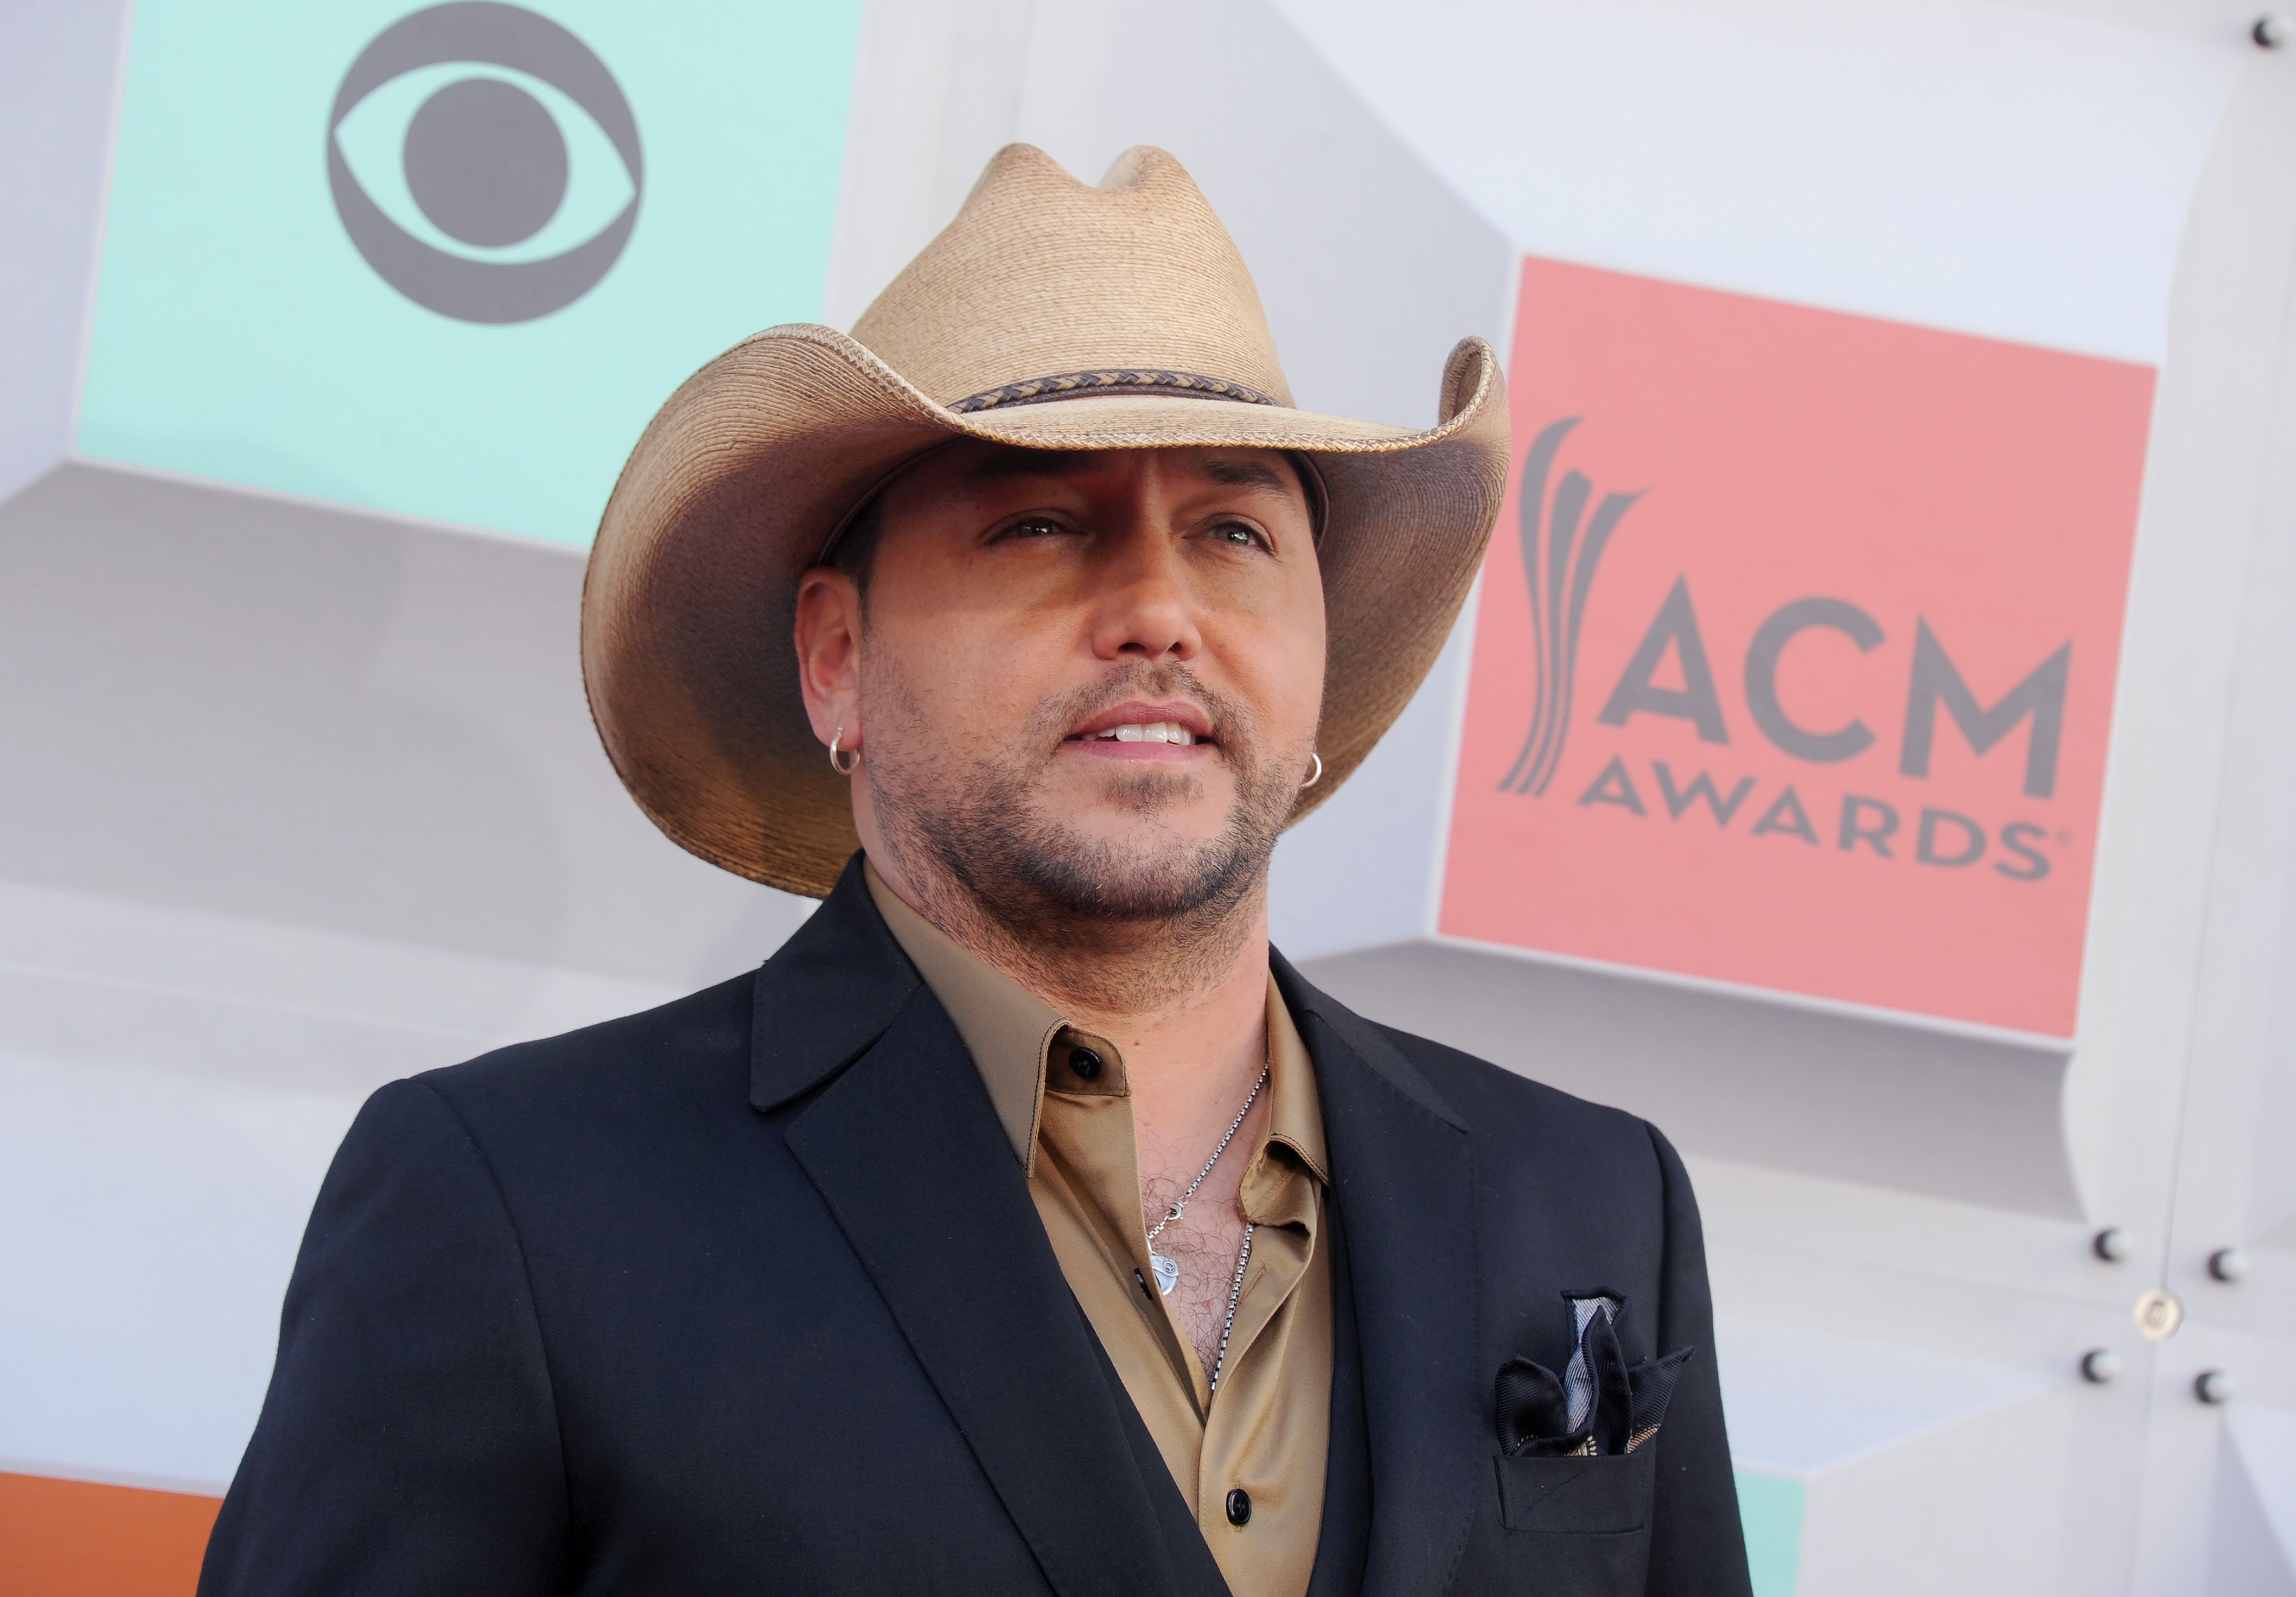 Jason Aldean at the 51st Academy Of Country Music Awards at MGM Grand Garden Arena on April 3, 2016, in Las Vegas, Nevada | Photo: Gregg DeGuire/WireImage/Getty Images